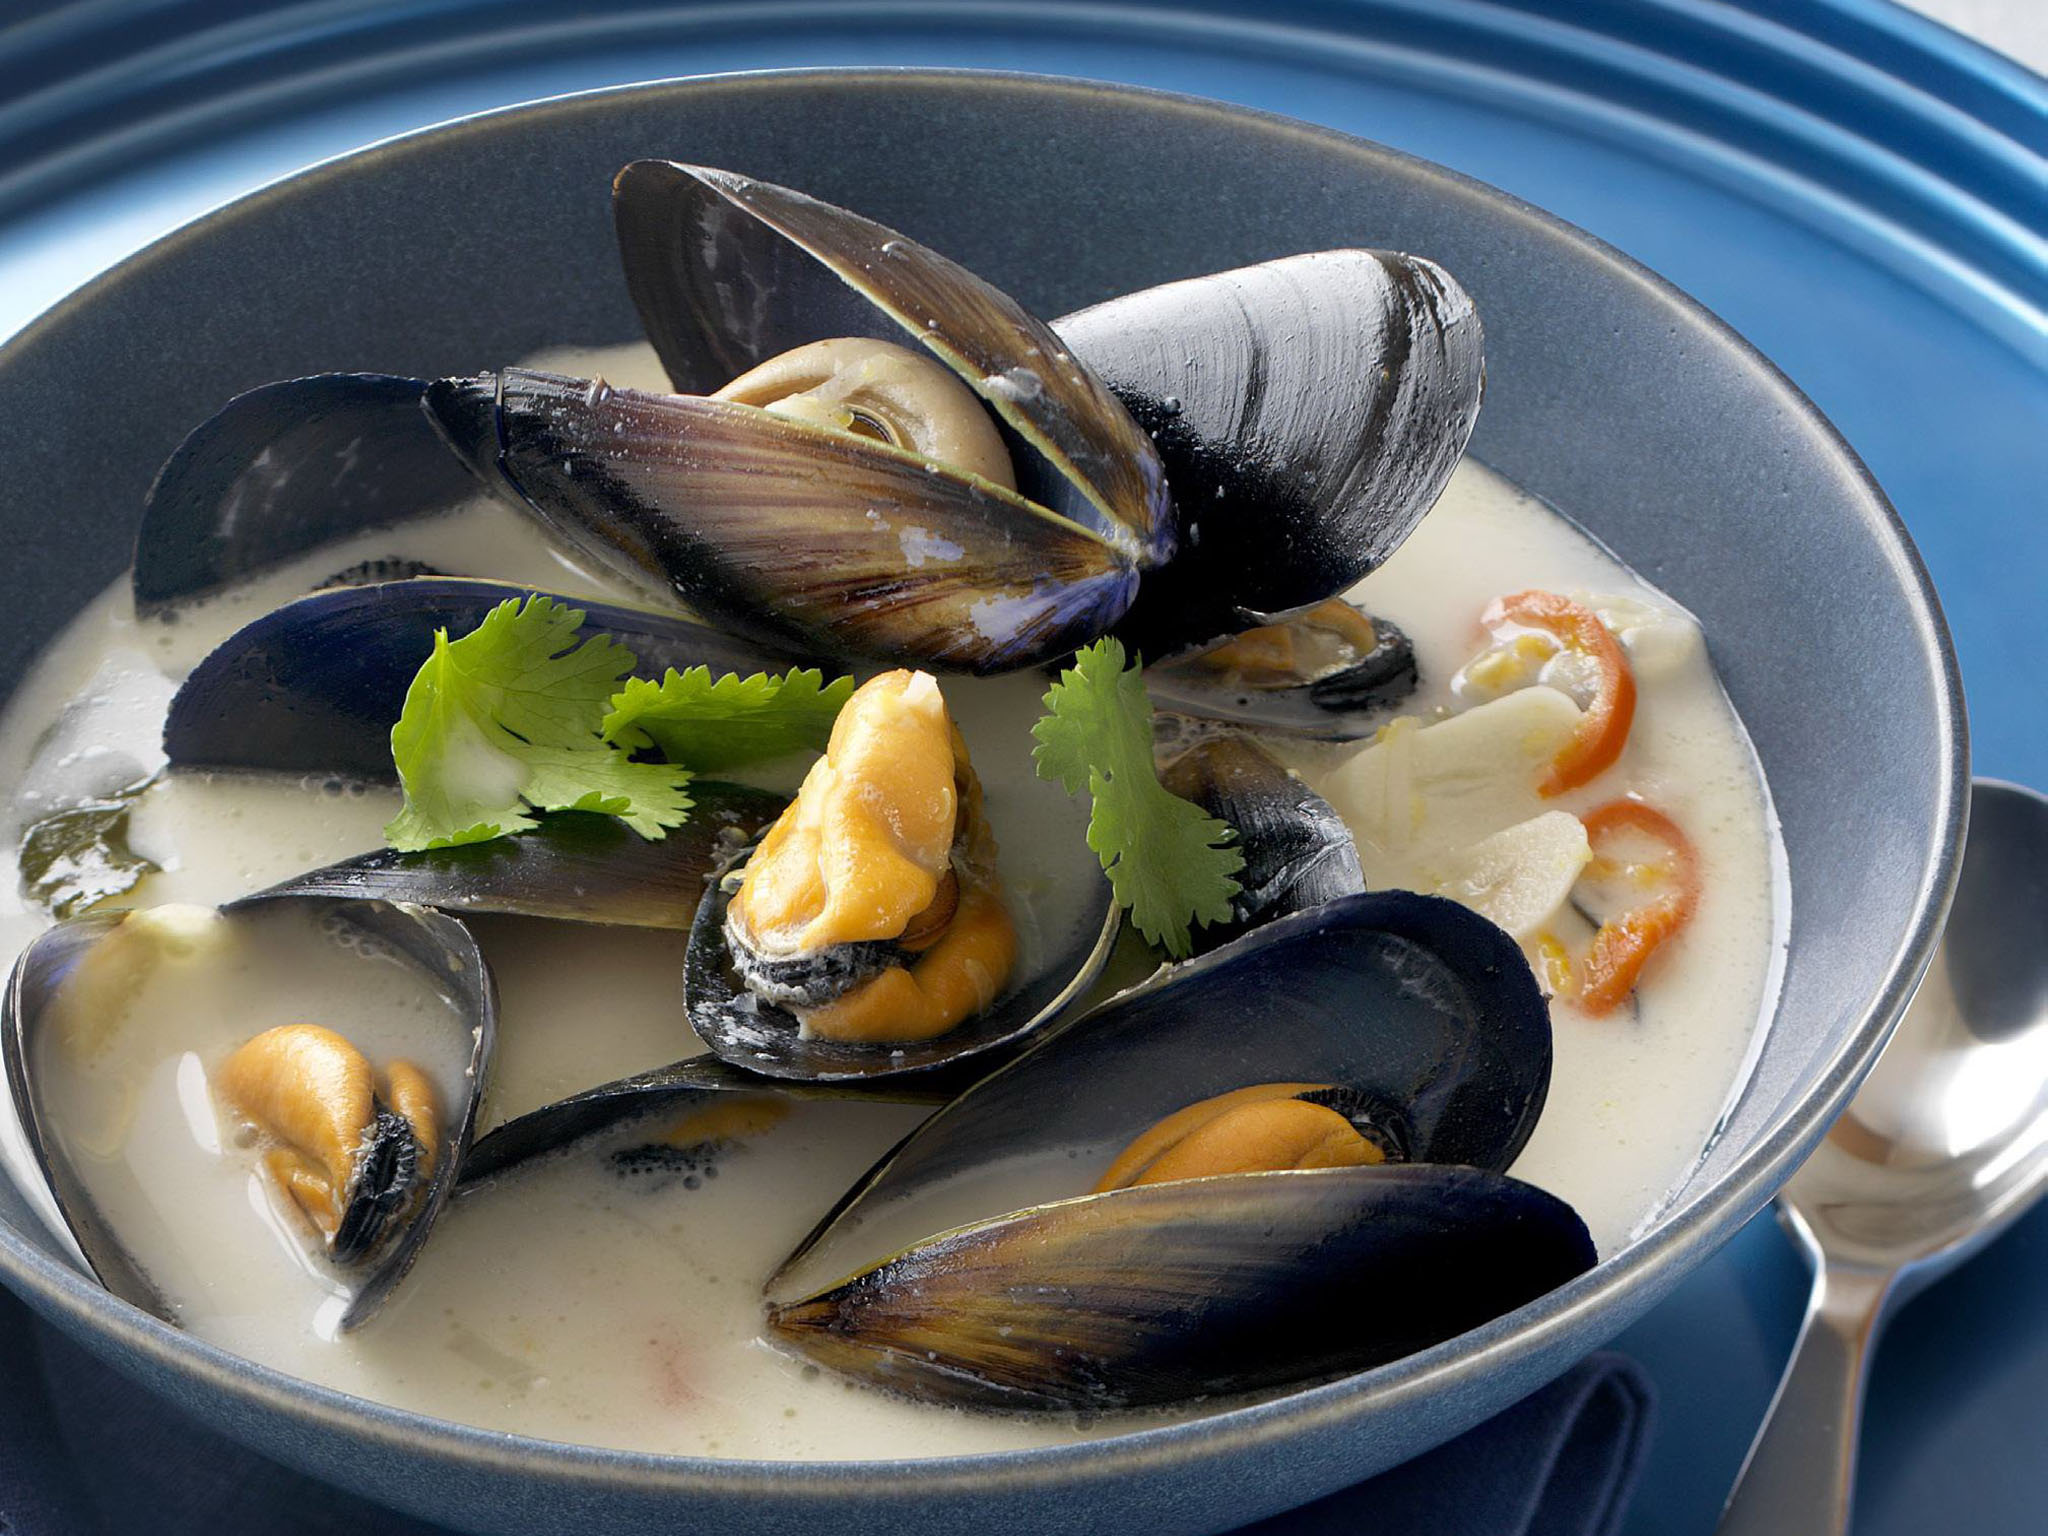 MUSSELS IN SPICED COCONUT BROTH